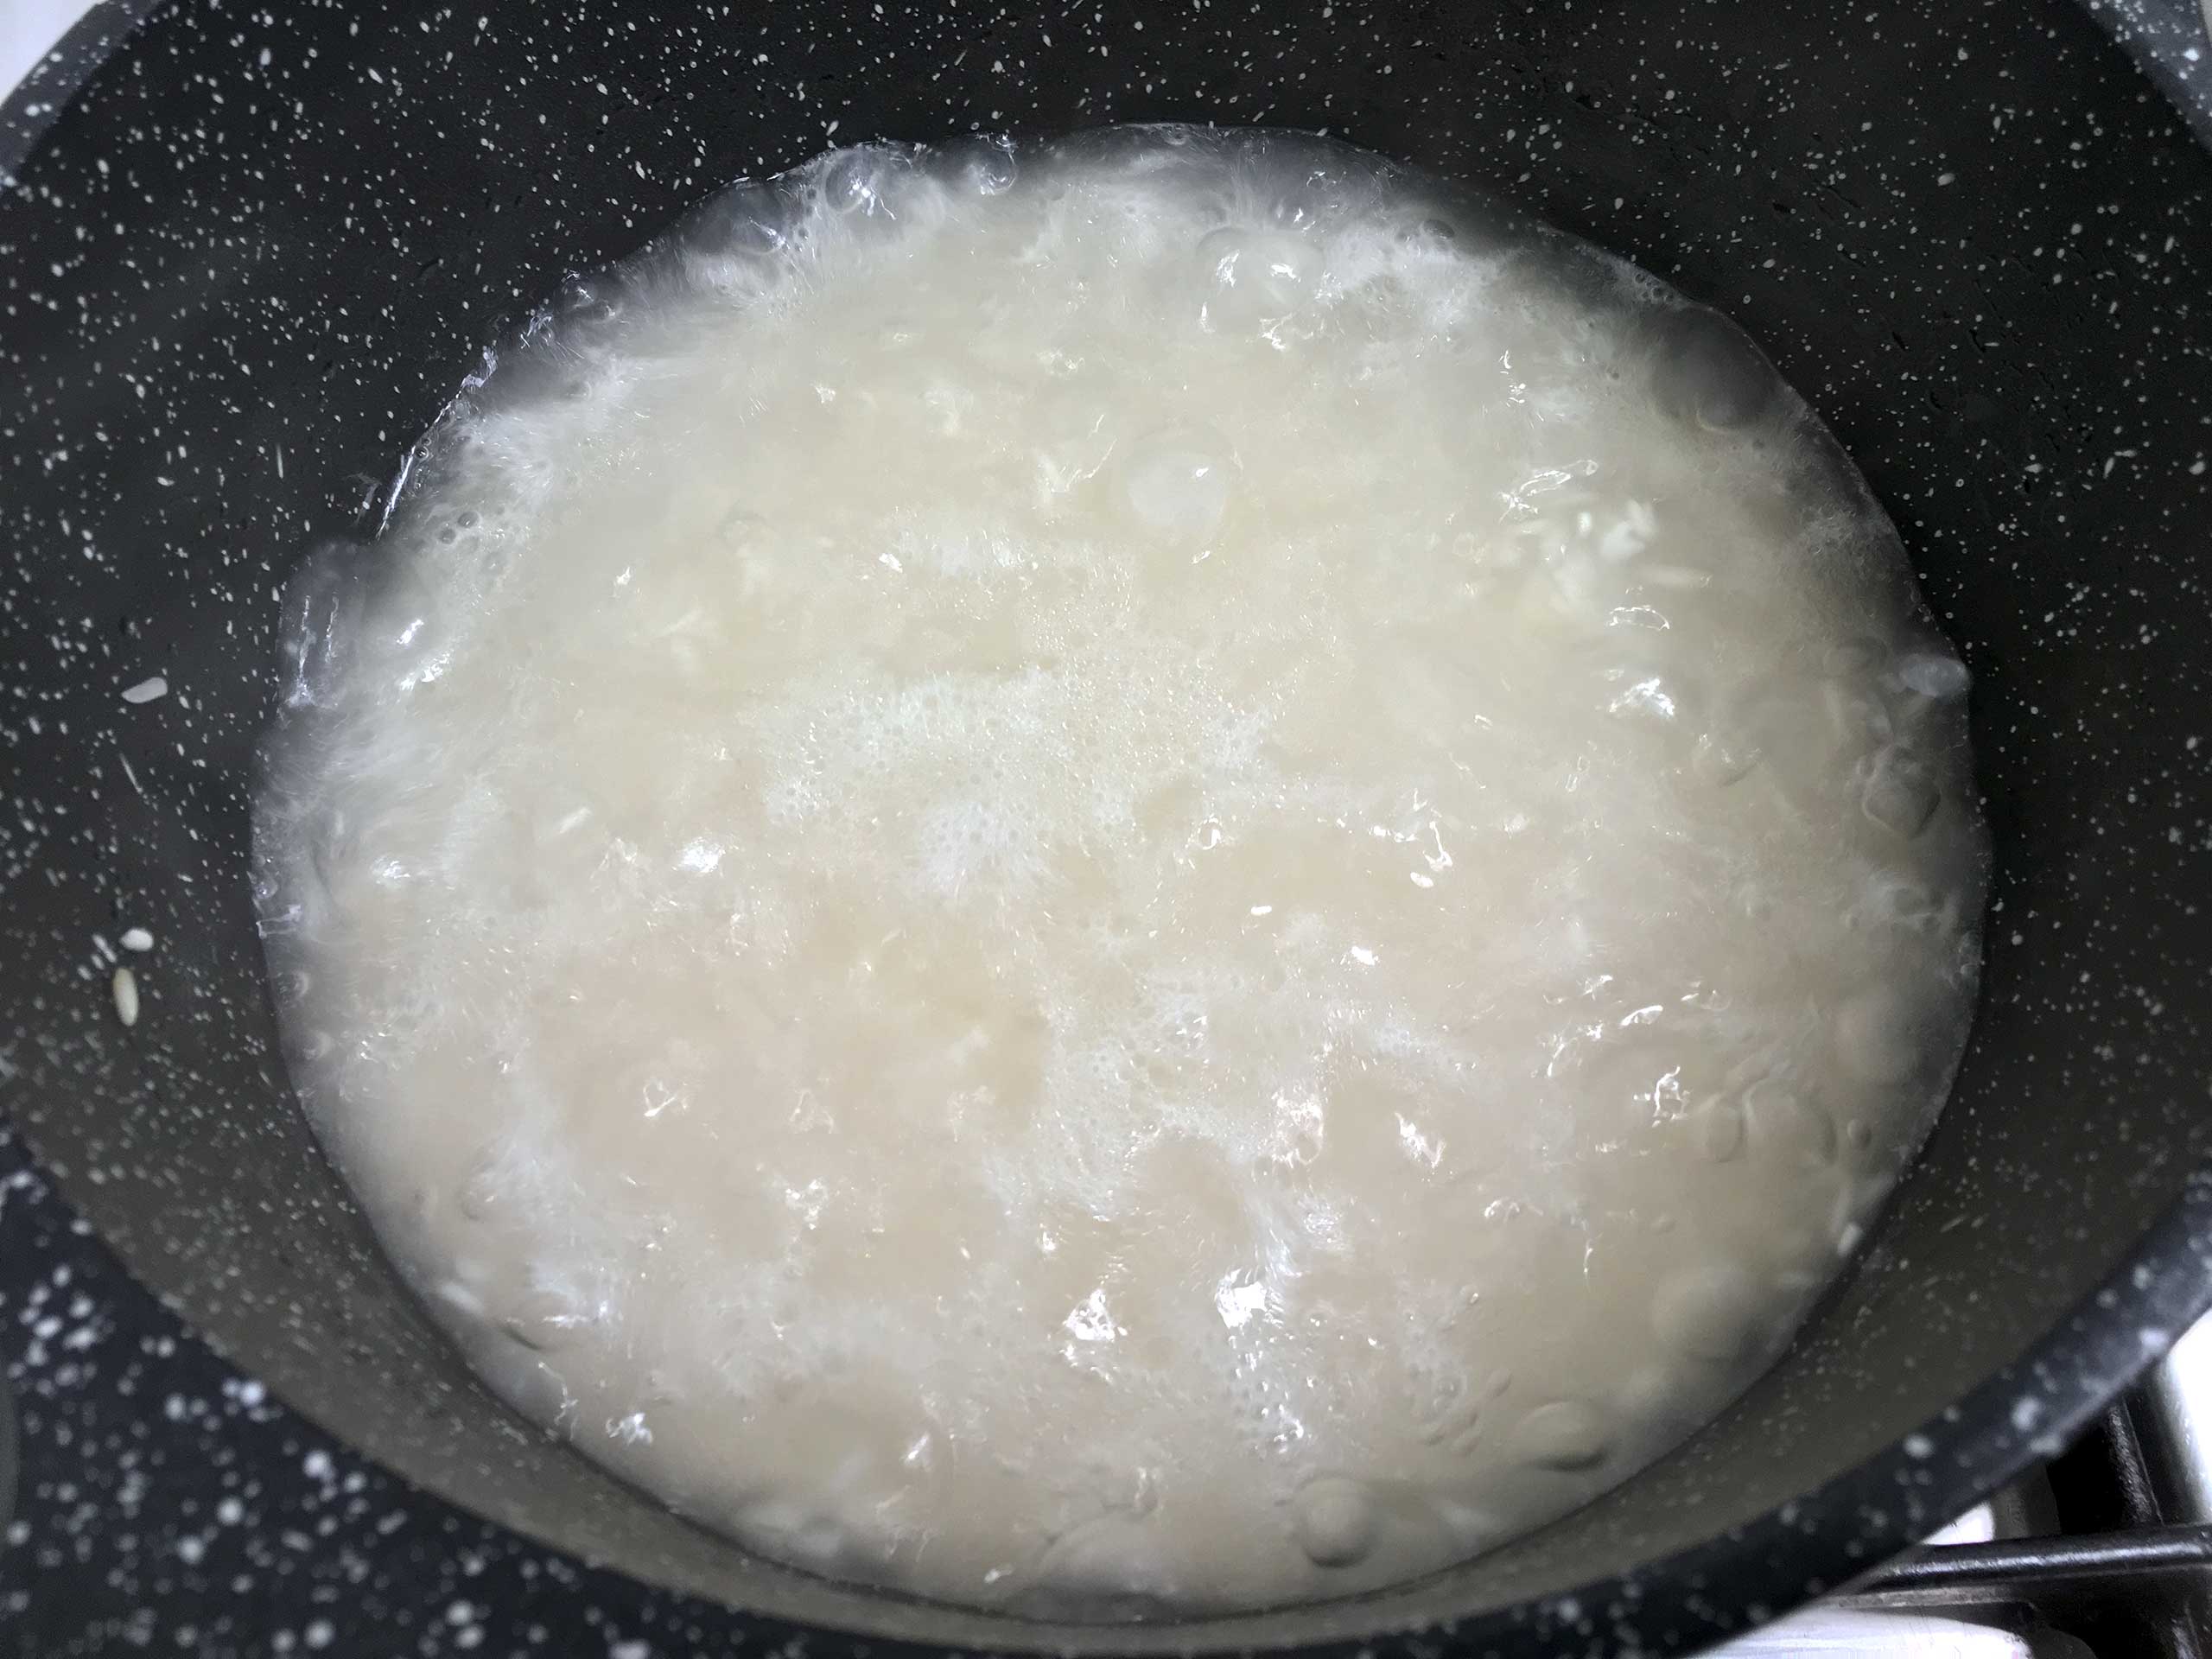 https://cooklikeachefathome.com/wp-content/uploads/2018/08/add-the-boiling-water-to-the-perfect-rice.jpg